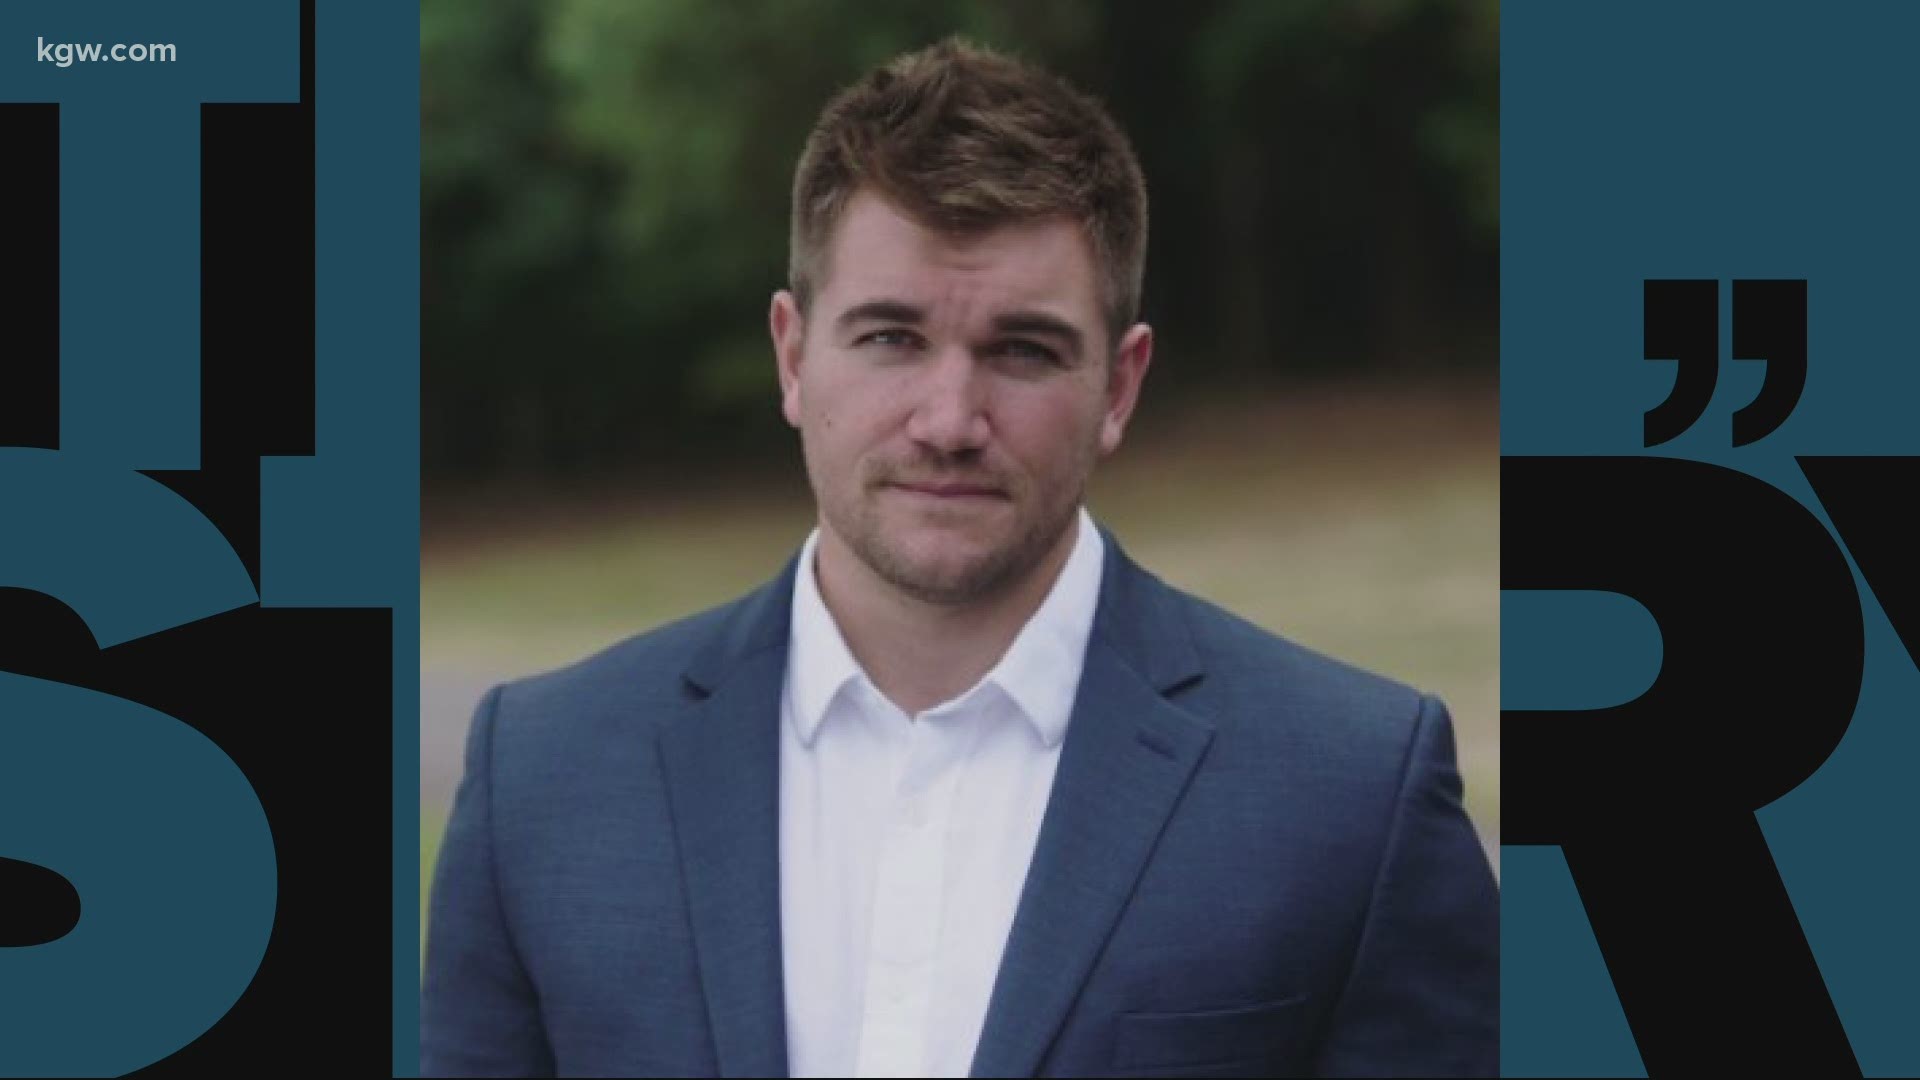 Longtime Democratic Congressman Peter DeFazio is facing Republican challenger Alek Skarlatos in a race that has received national attention.